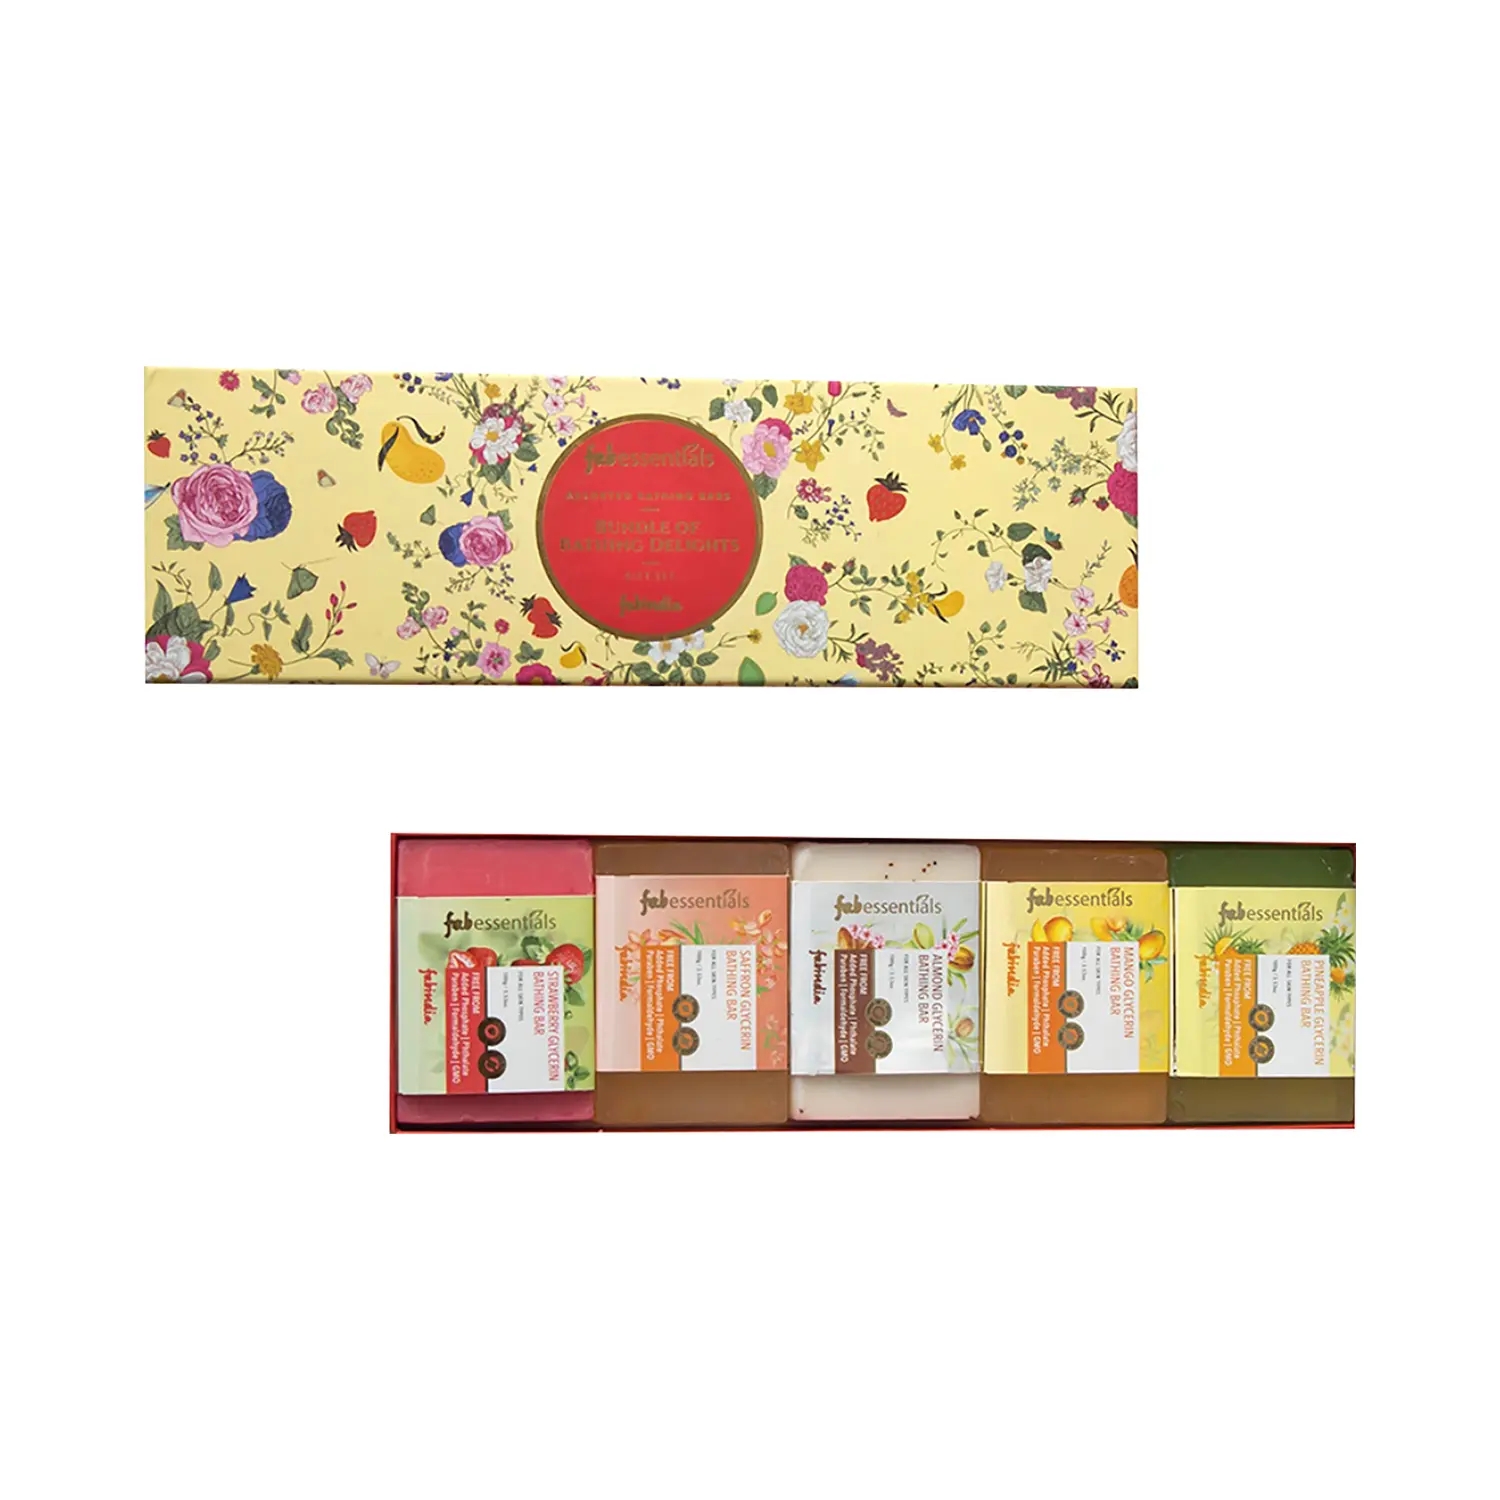 Fabessentials by Fabindia | Fabessentials by Fabindia Bundle of Assorted Bathing Delight Gift Set  (5Pcs)